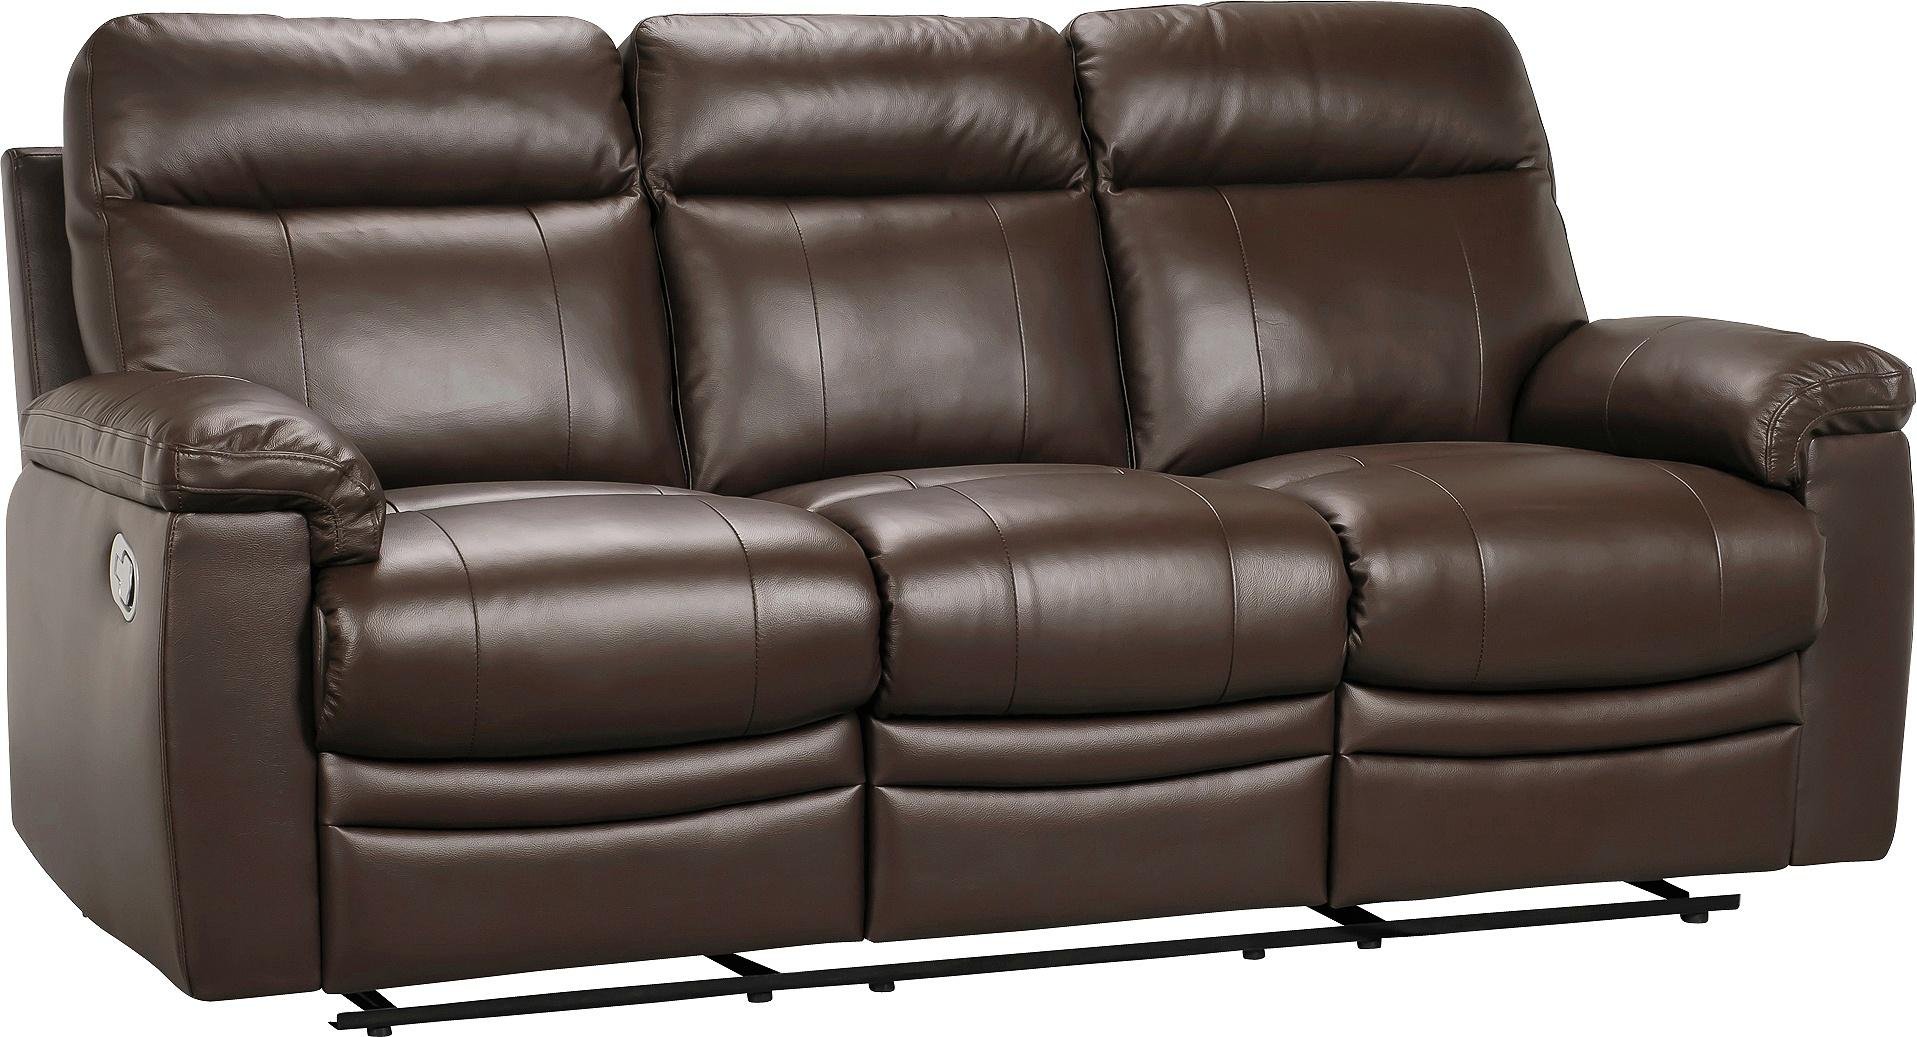 Argos Home New Paolo 3 Seater Manual Recliner Sofa Reviews